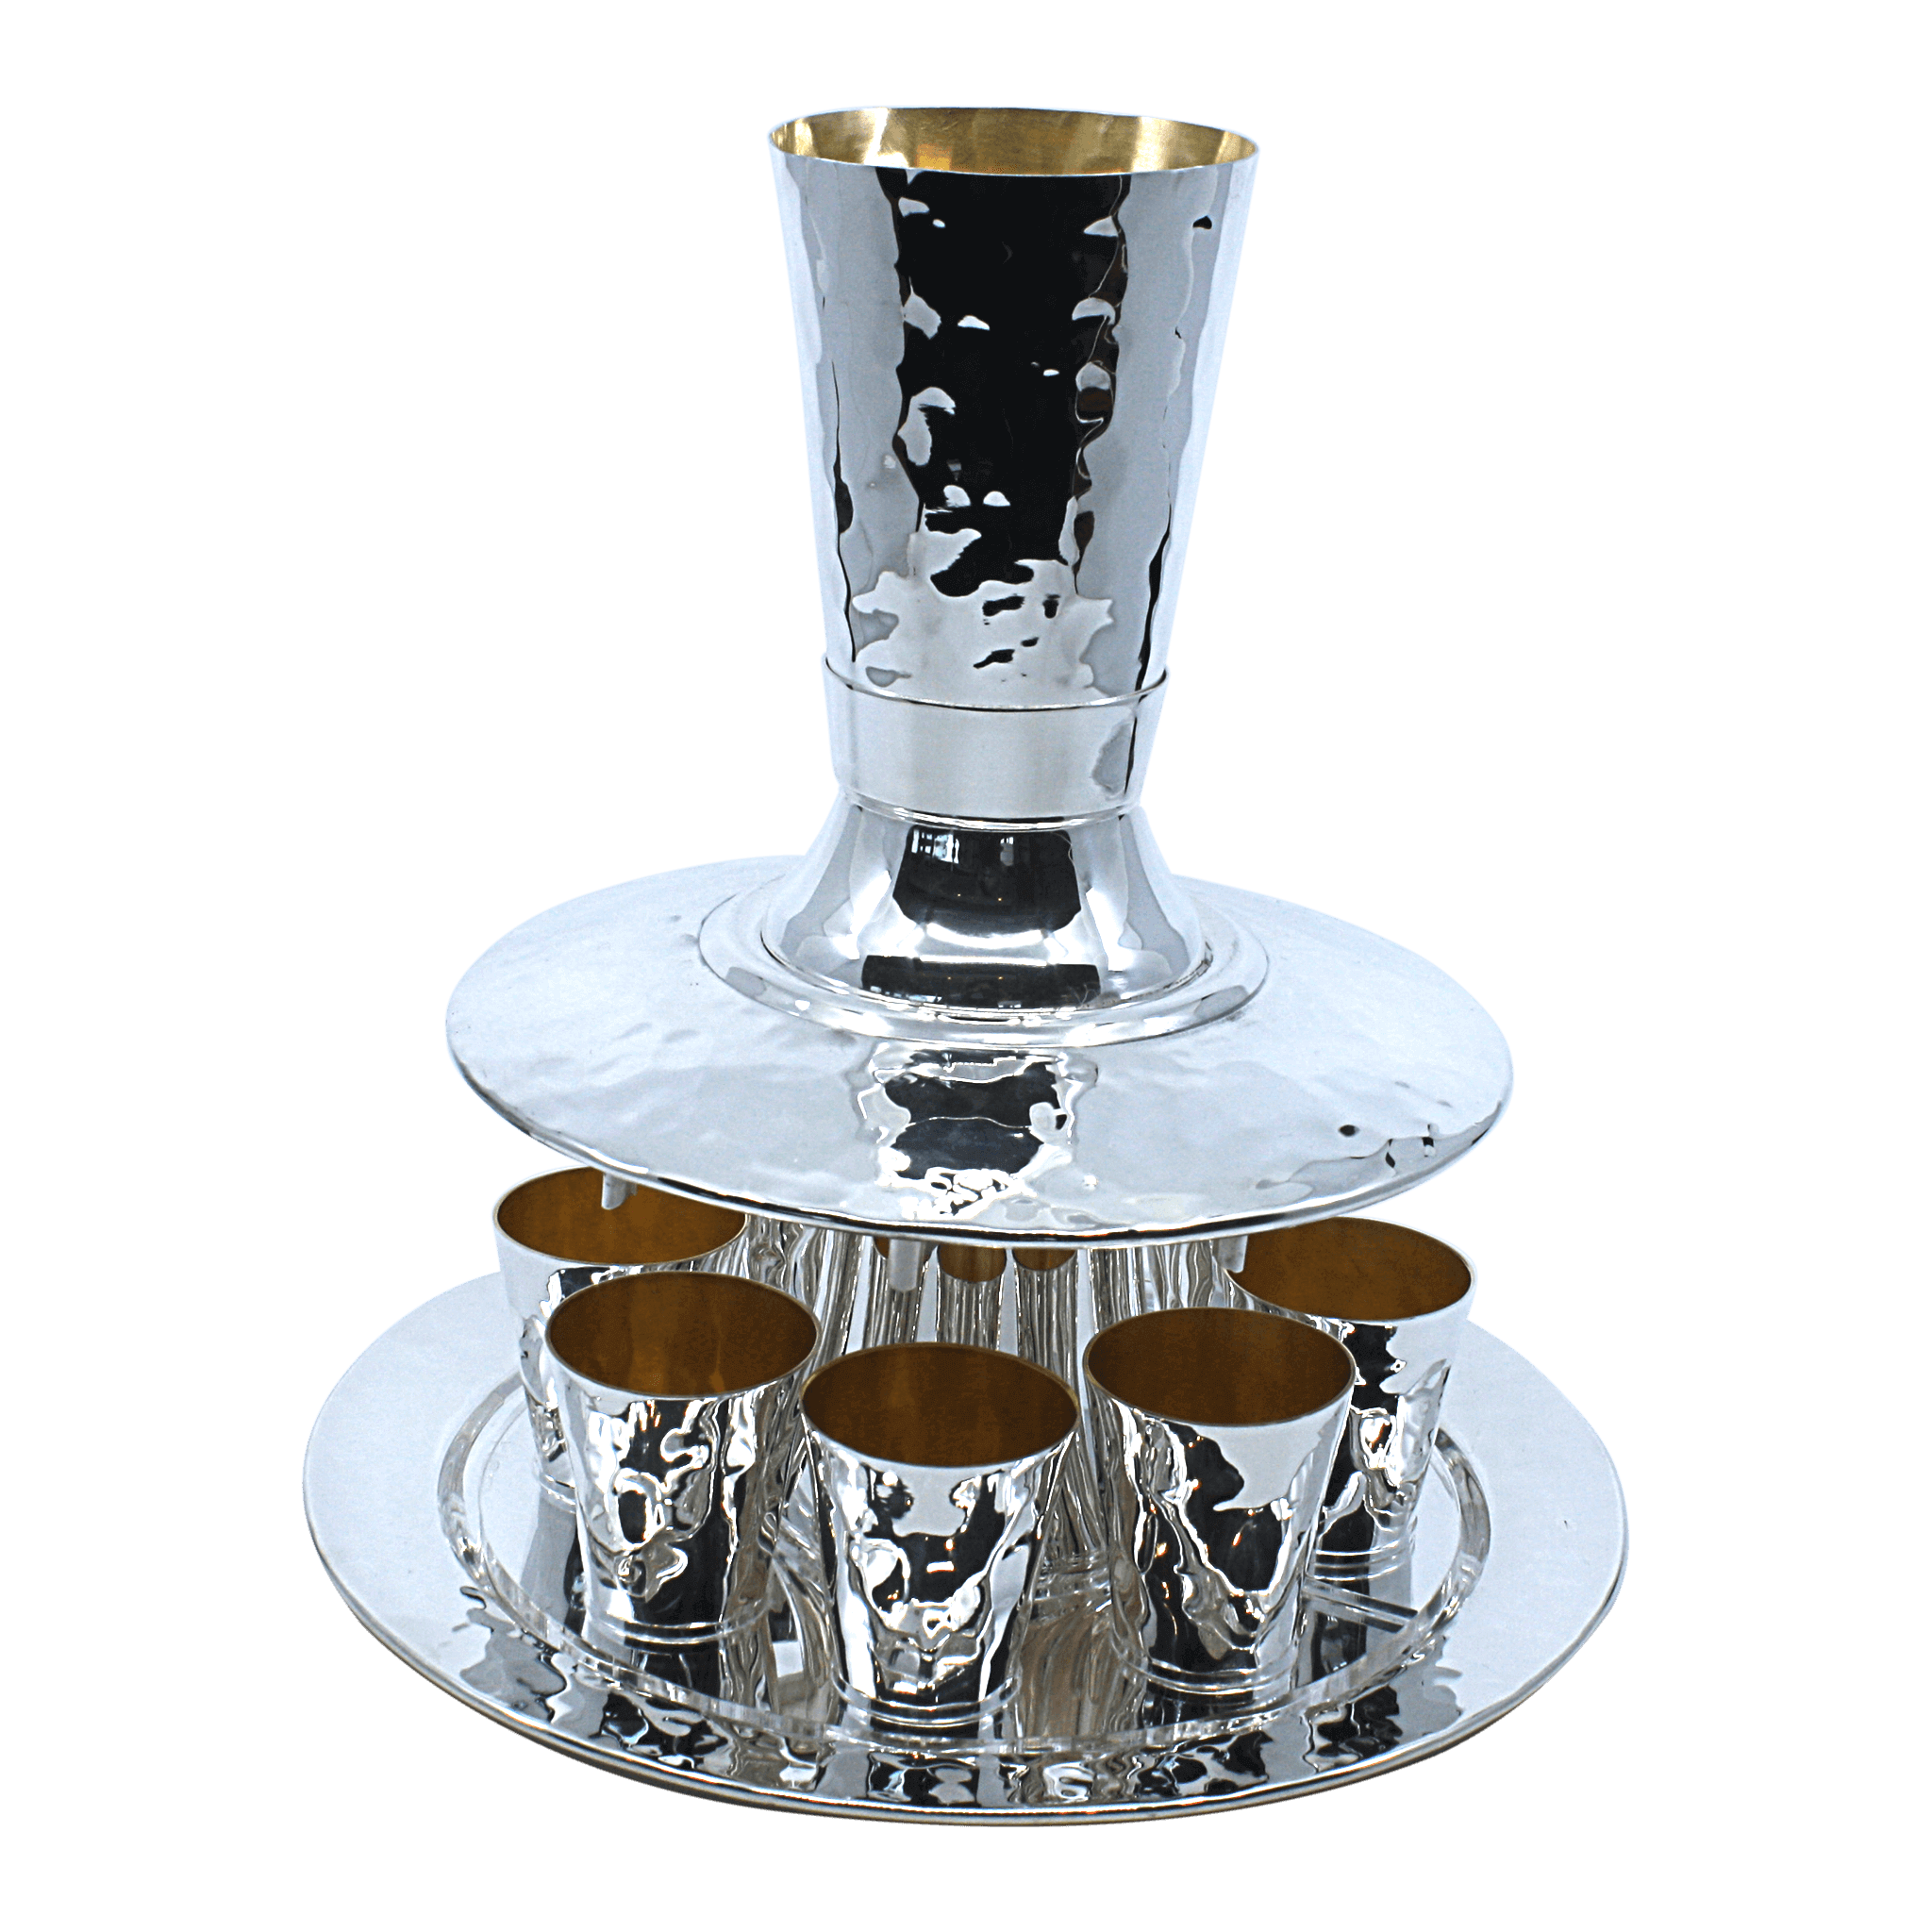 Hammered Shabbat Wine Fountain For 6,8 or 12 guests - Piece By Zion Hadad